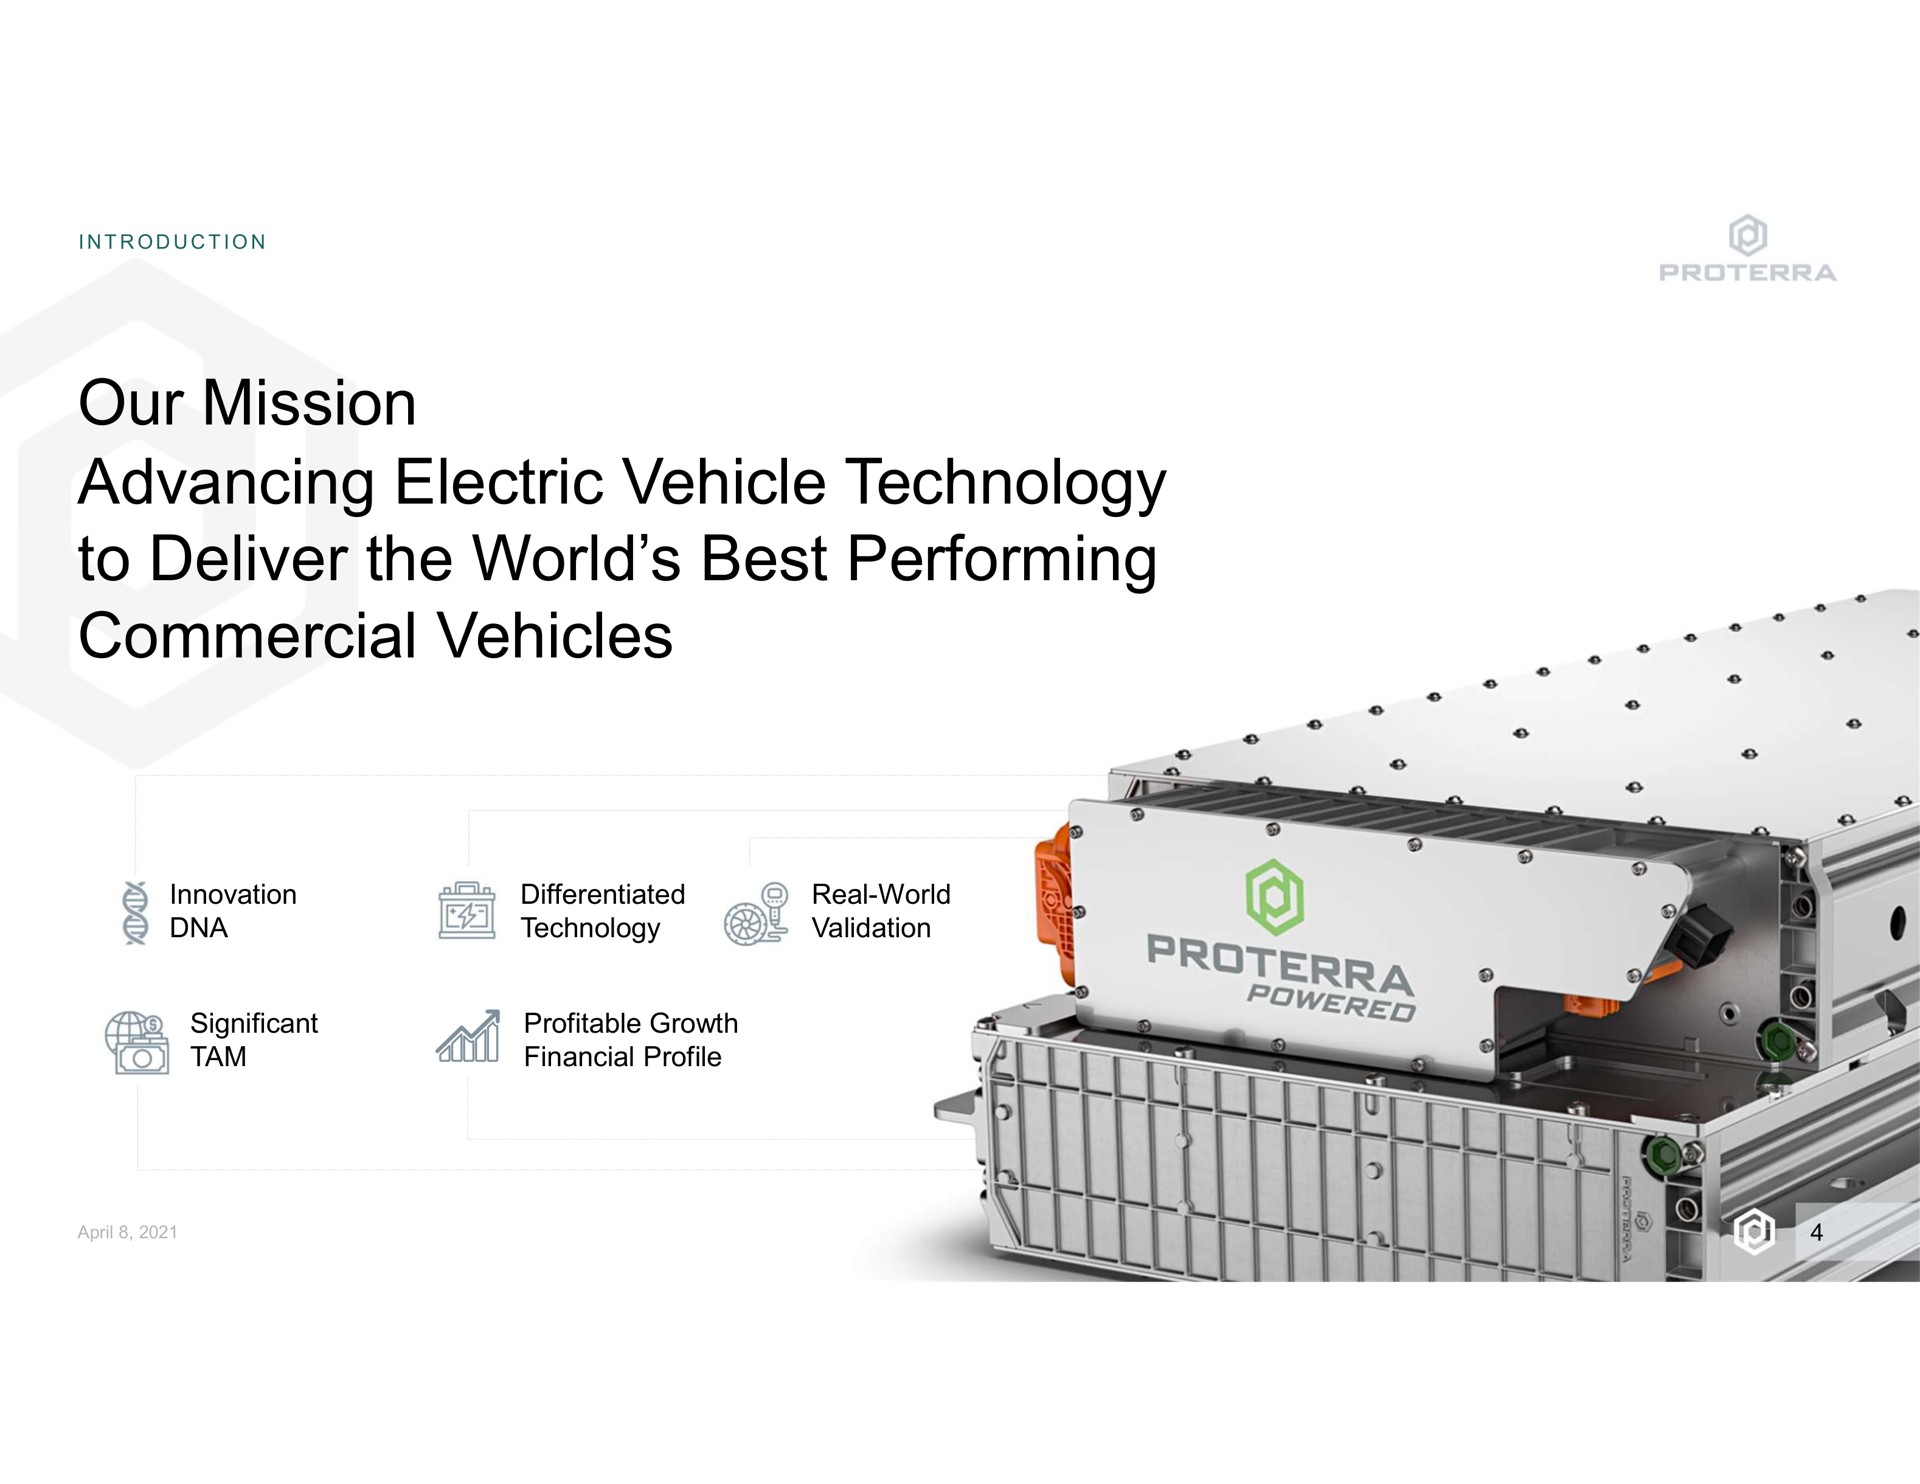 our mission advancing electric vehicle technology to deliver the world best performing commercial vehicles introduction innovation differentiated real world validation significant tam profitable growth financial profile a | Proterra